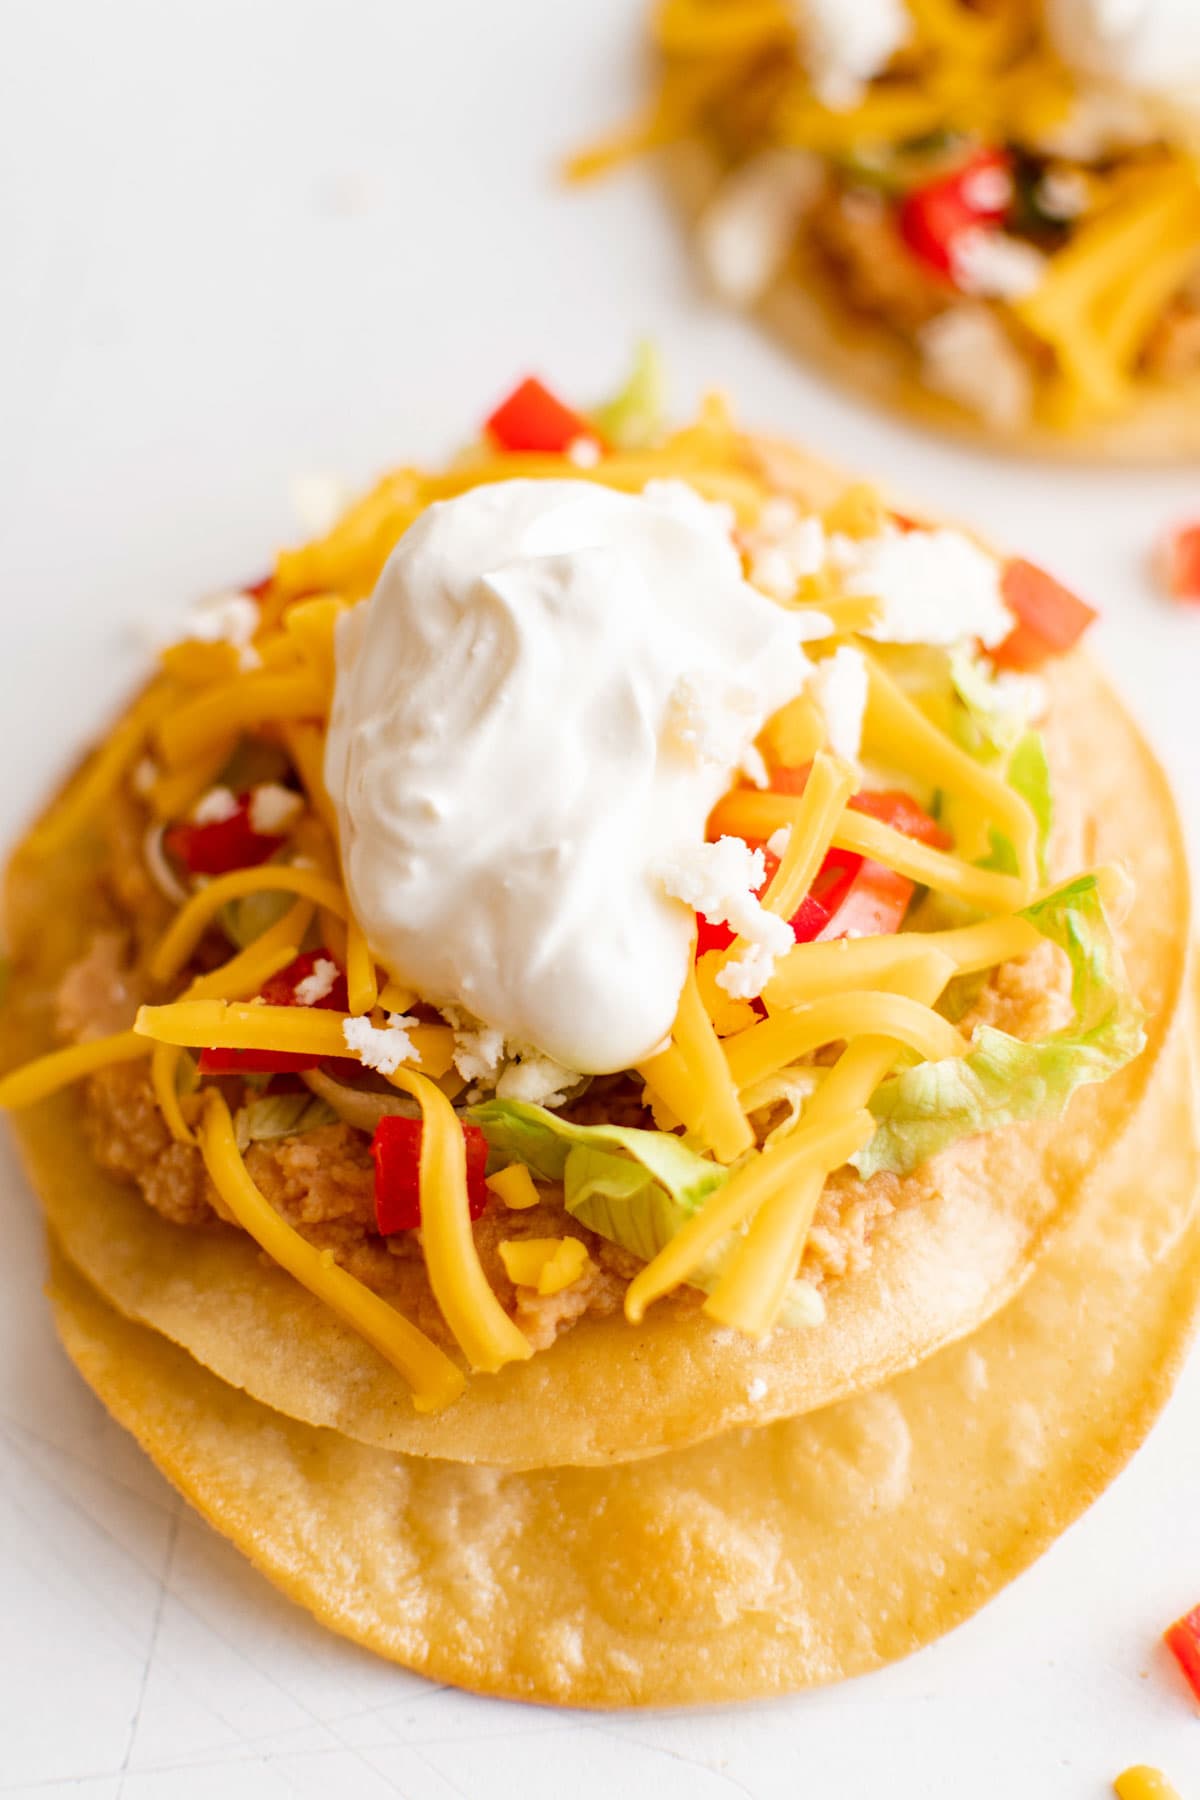 Baked tostada shell with beans, cheese and sour cream toppings.